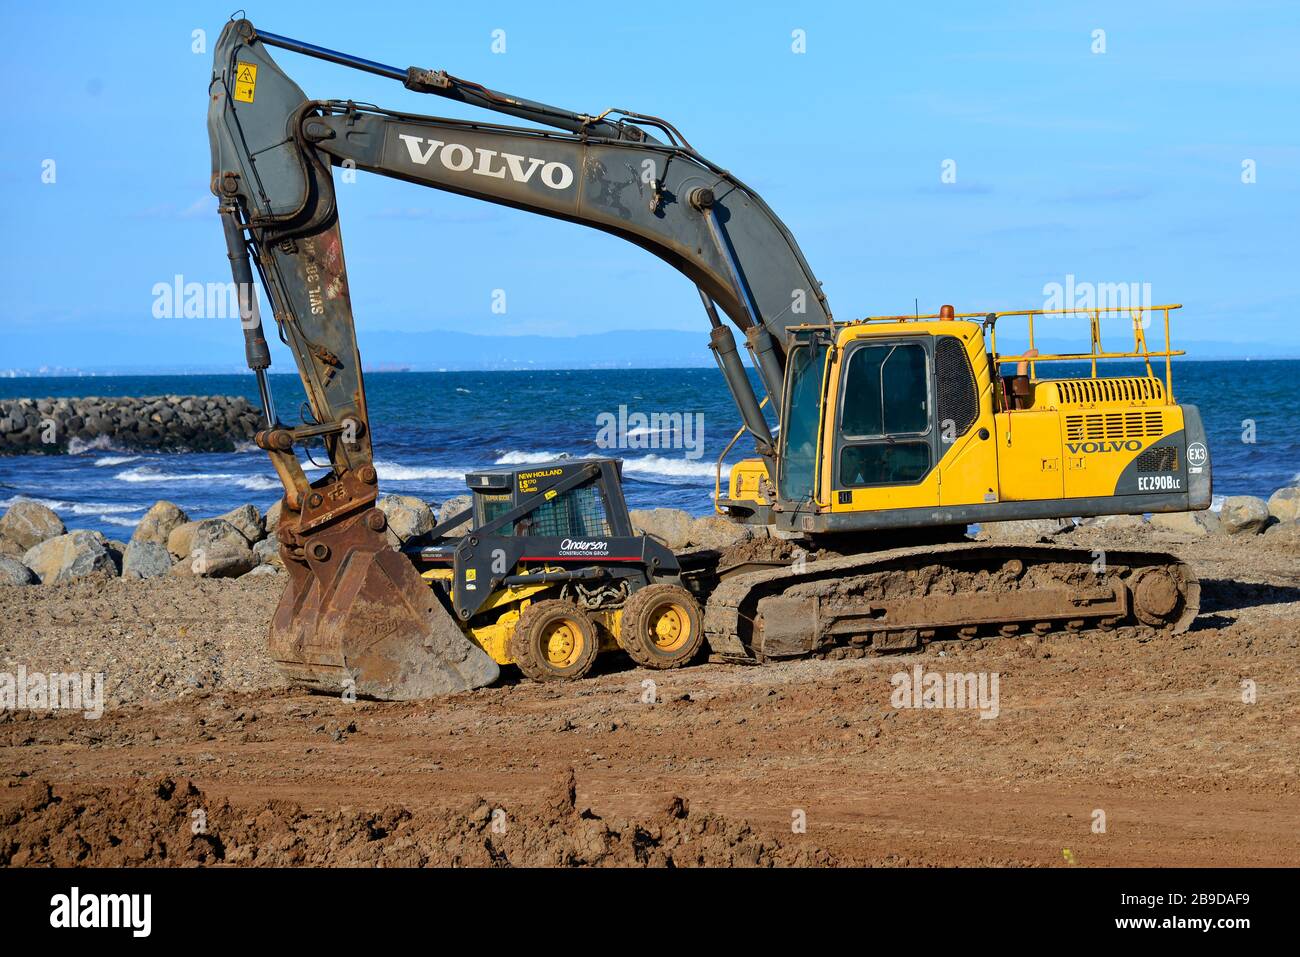 Yellow Earth Moving Front End Digger Playing with a Smaller Yellow Friend for Security Purposes Stock Photo